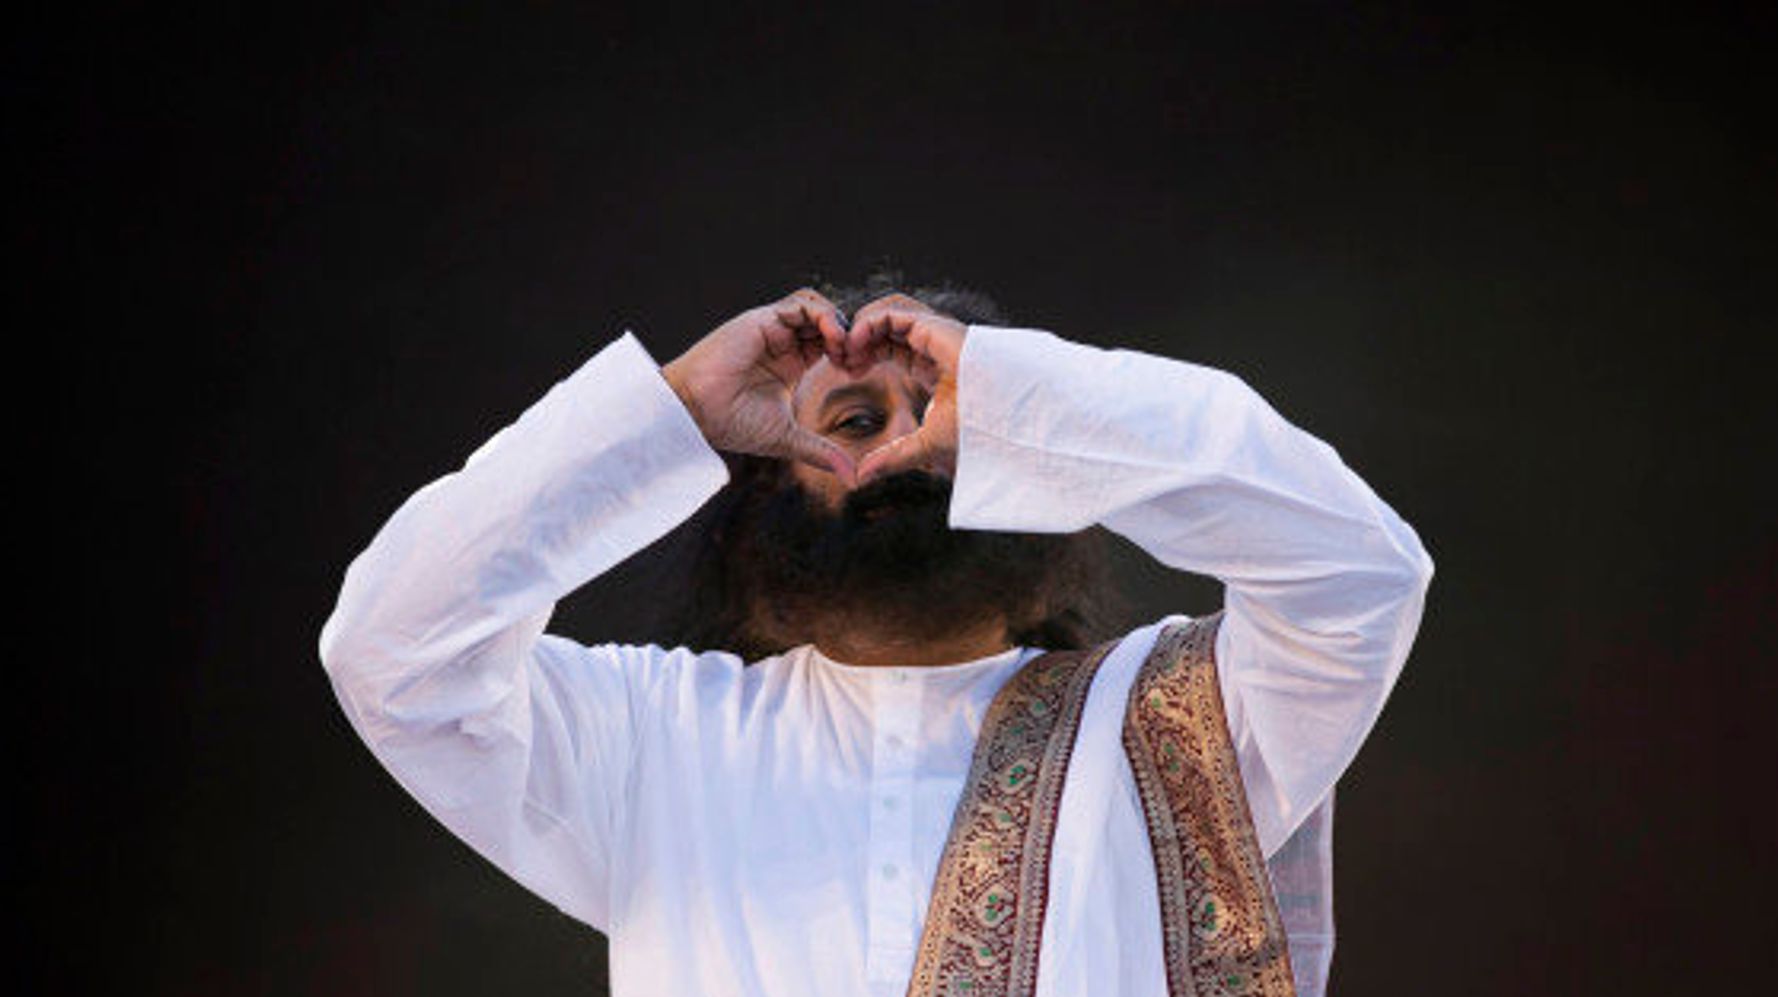 Art of Living founder Sri Sri Ravi Shankar in Delhi after three years, to  take part in various events – India TV